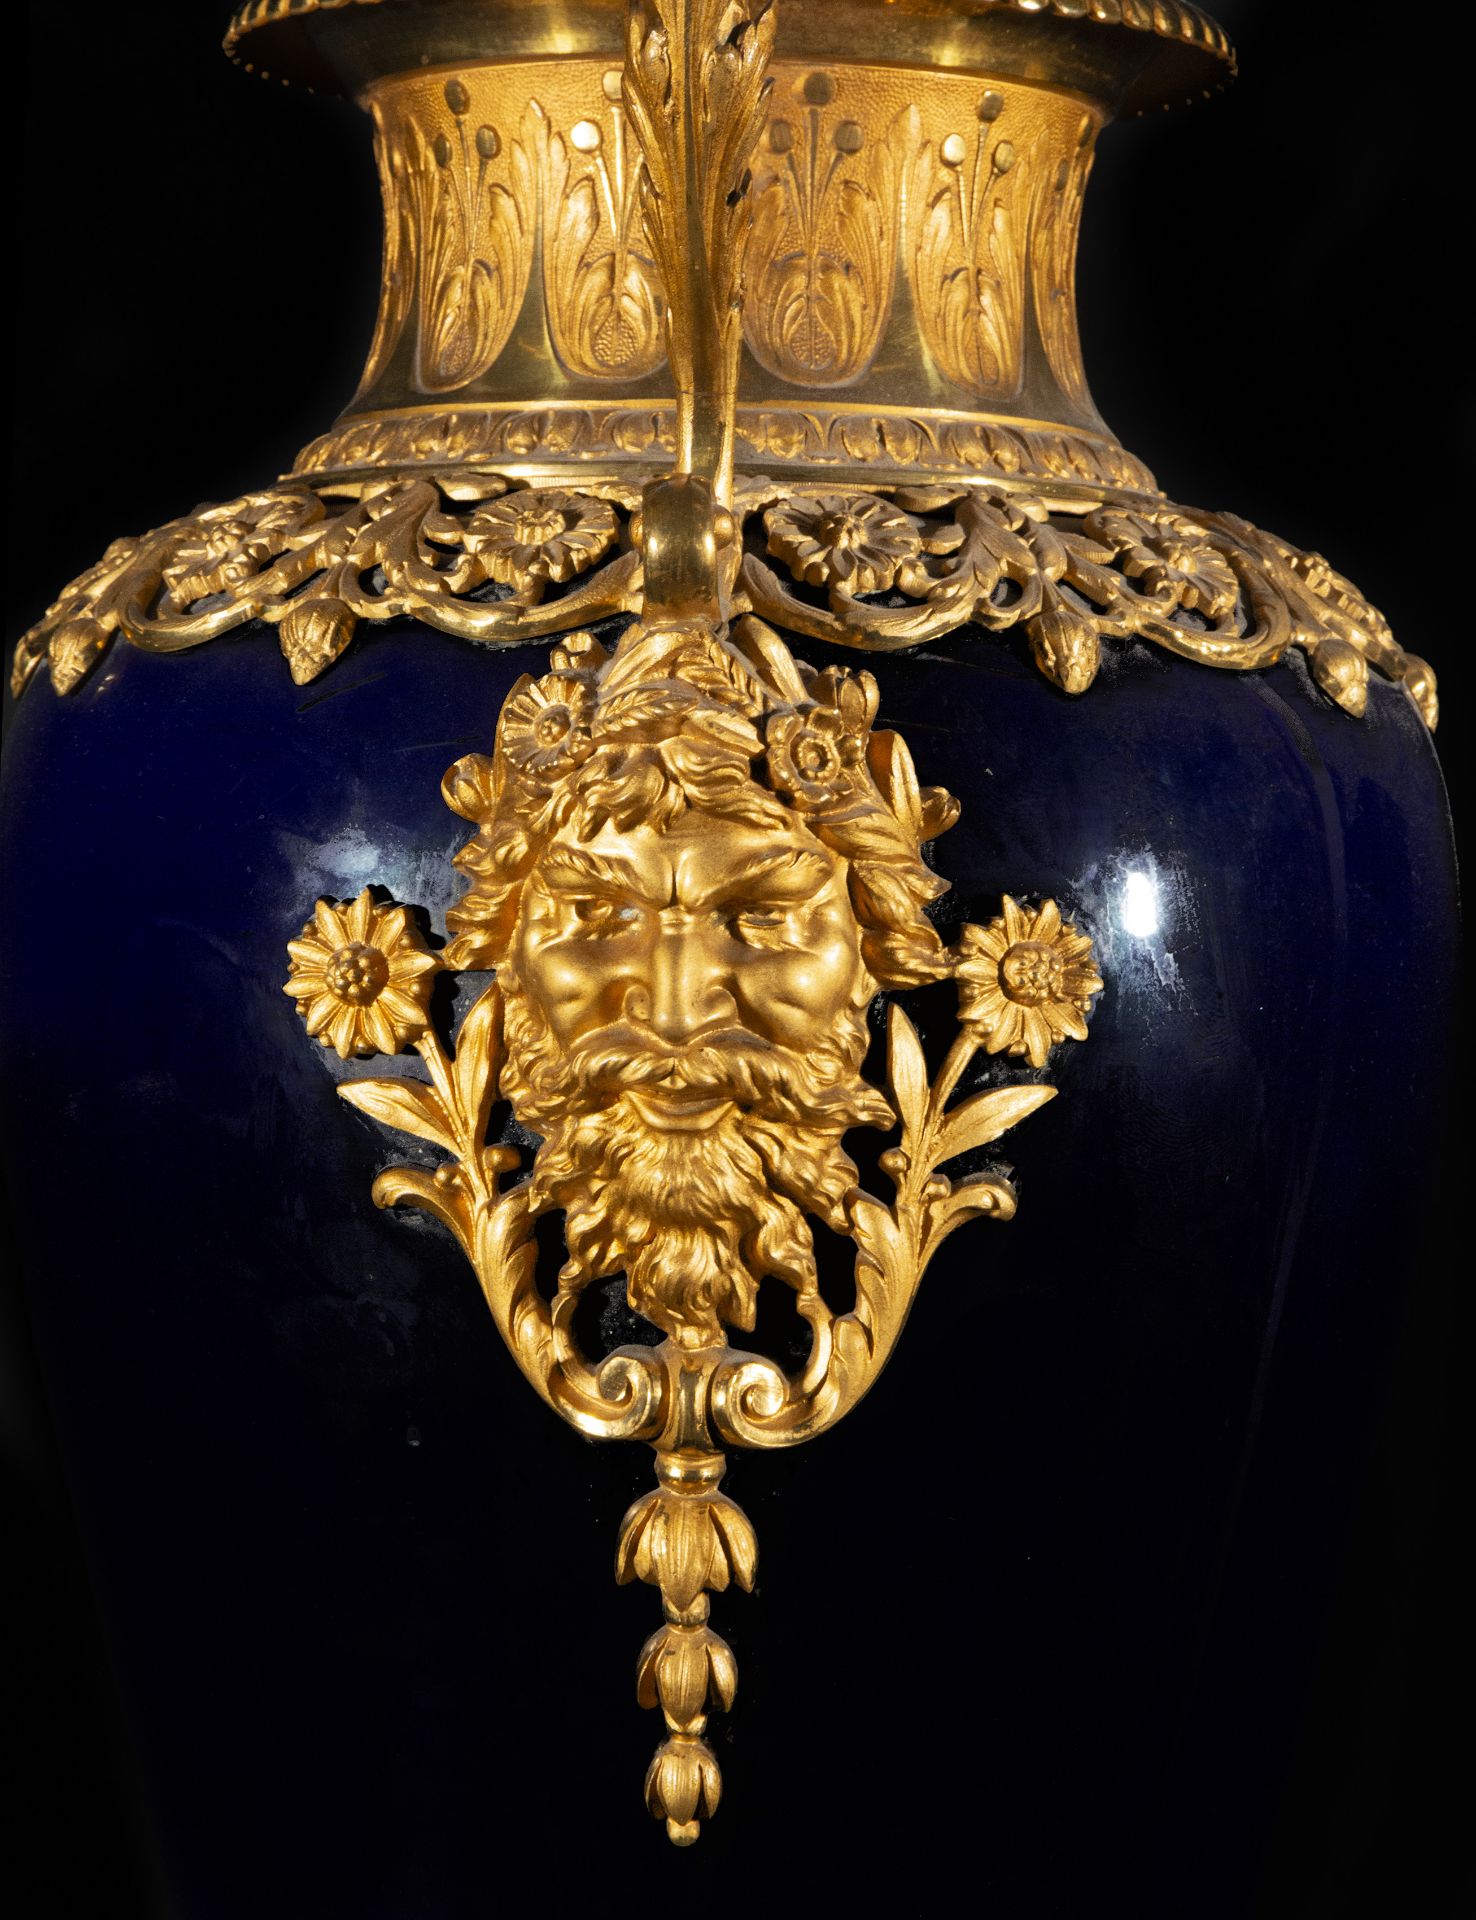 Pair of Large Sevres Vases in "Bleu Celeste" porcelain from the 19th century - Image 6 of 9